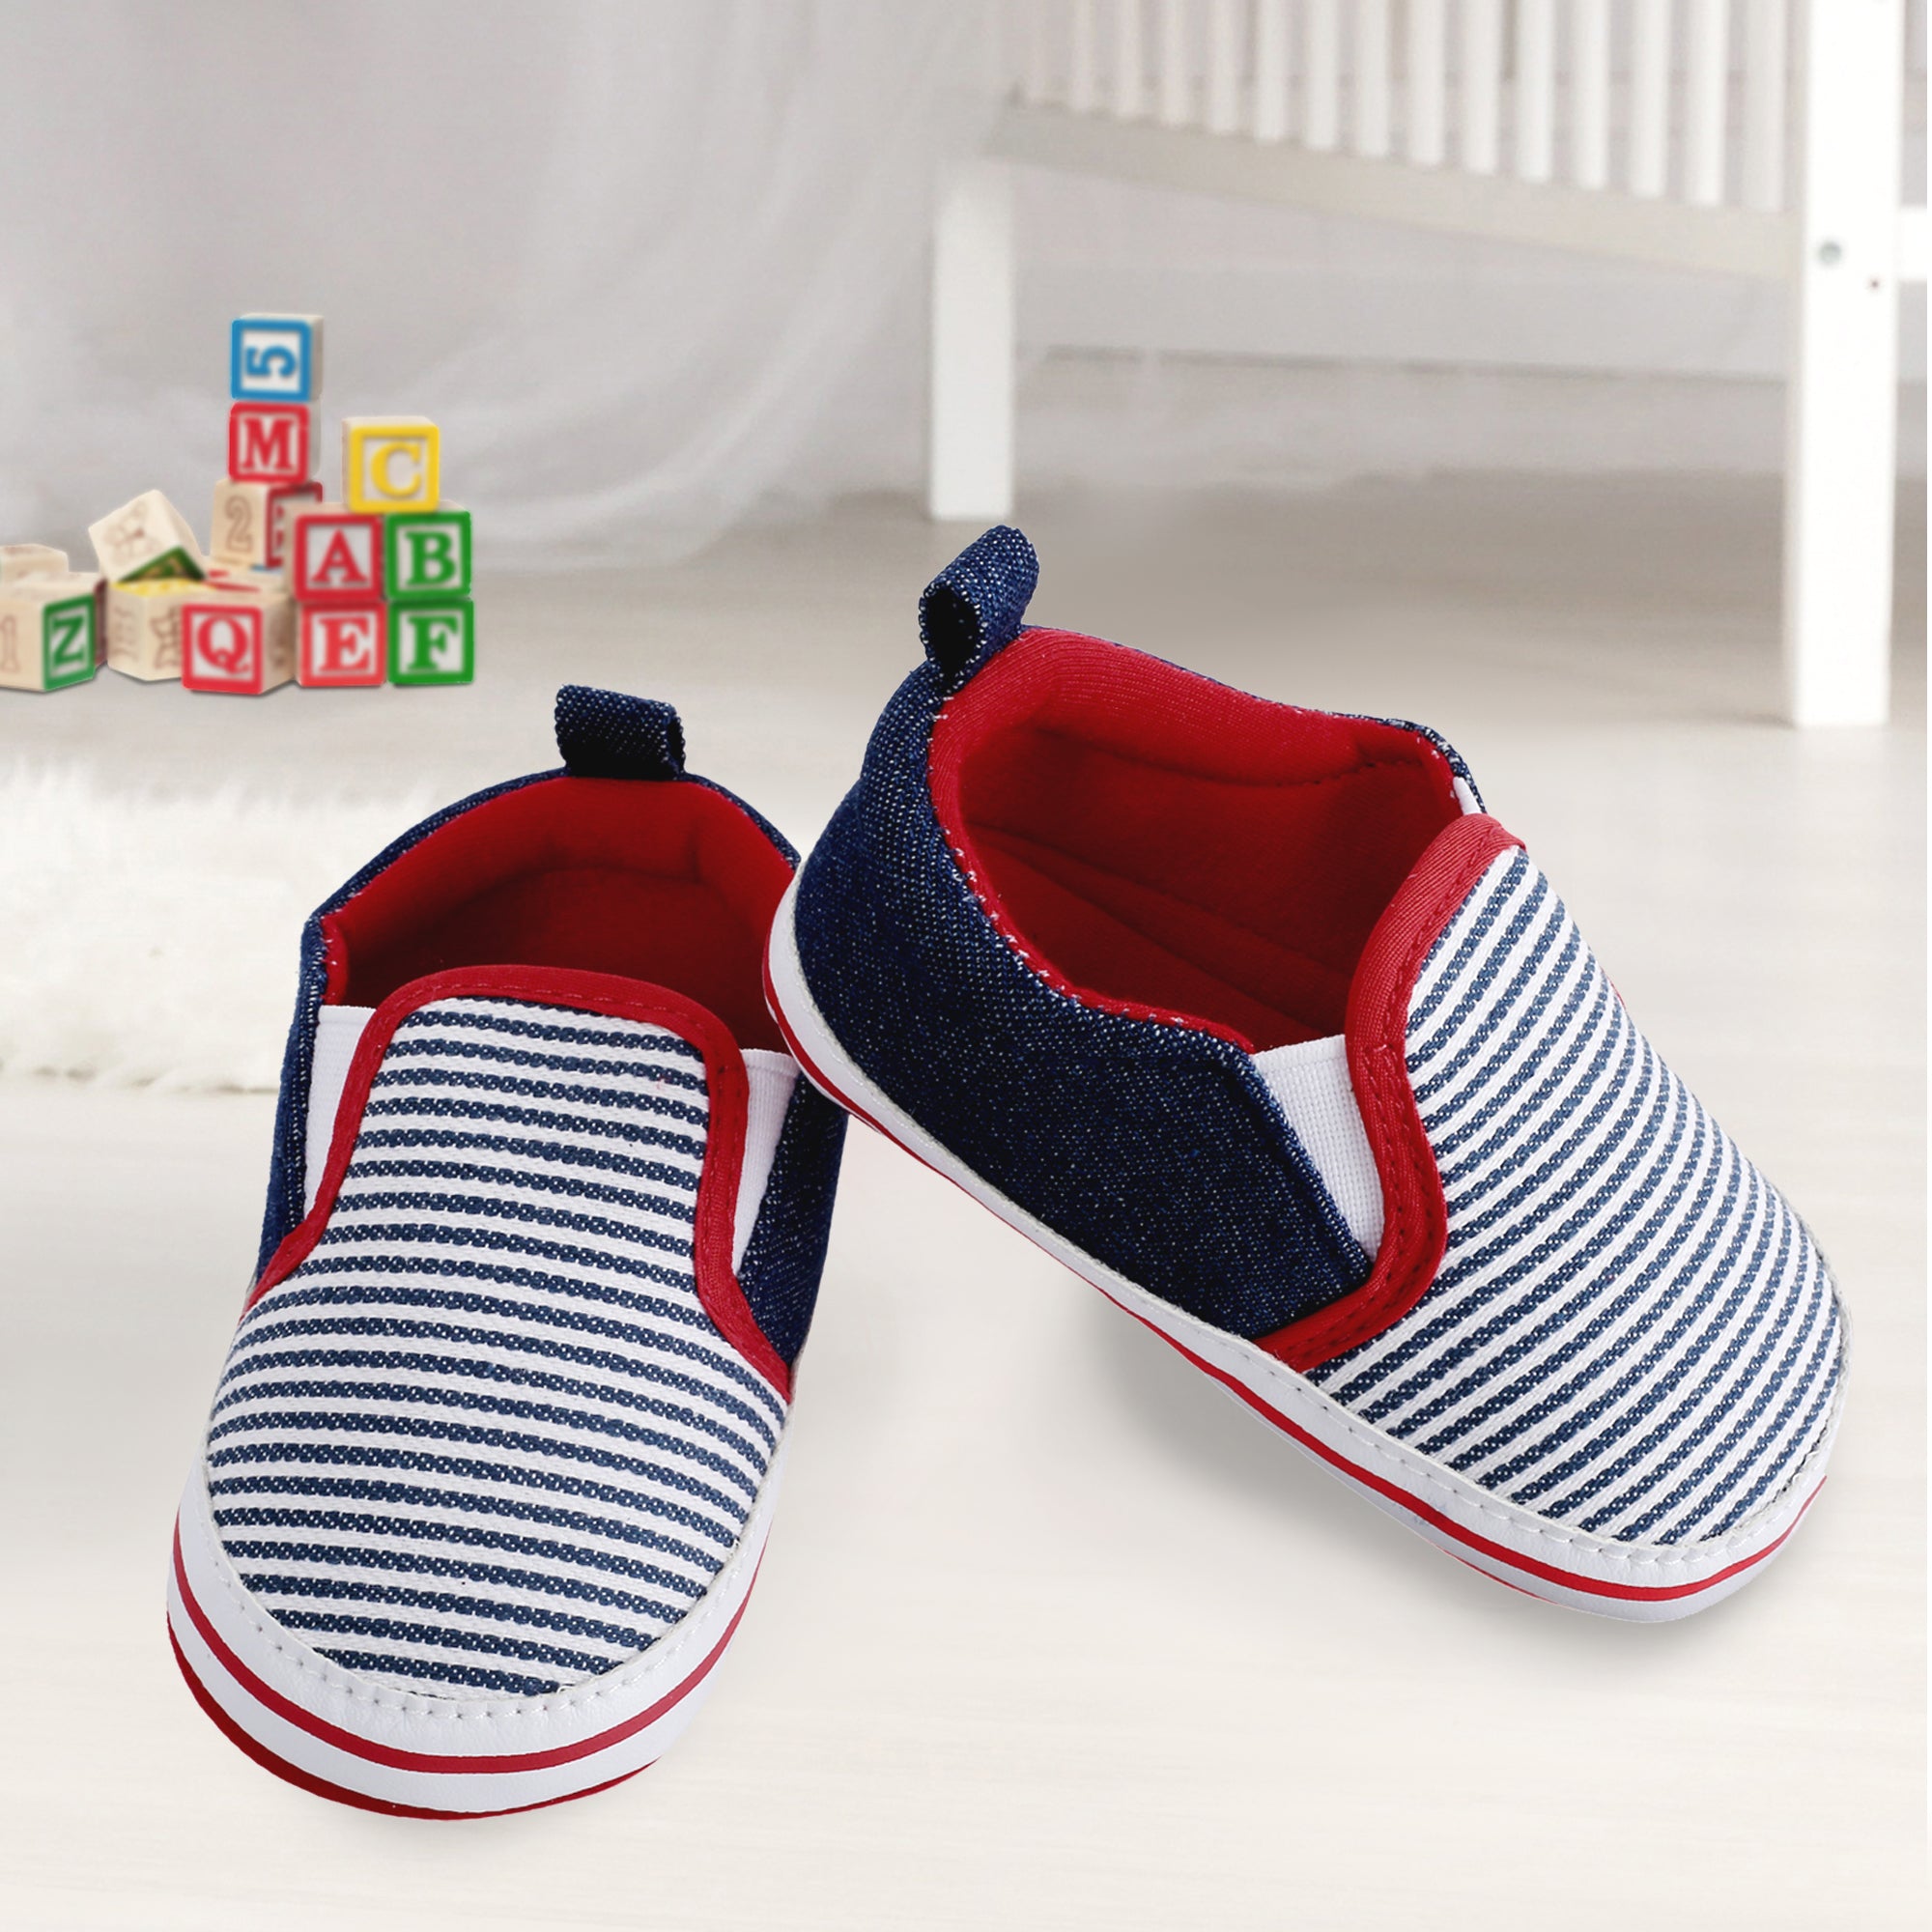 Baby Moo Striped Blue Slip-On Booties - Baby Moo